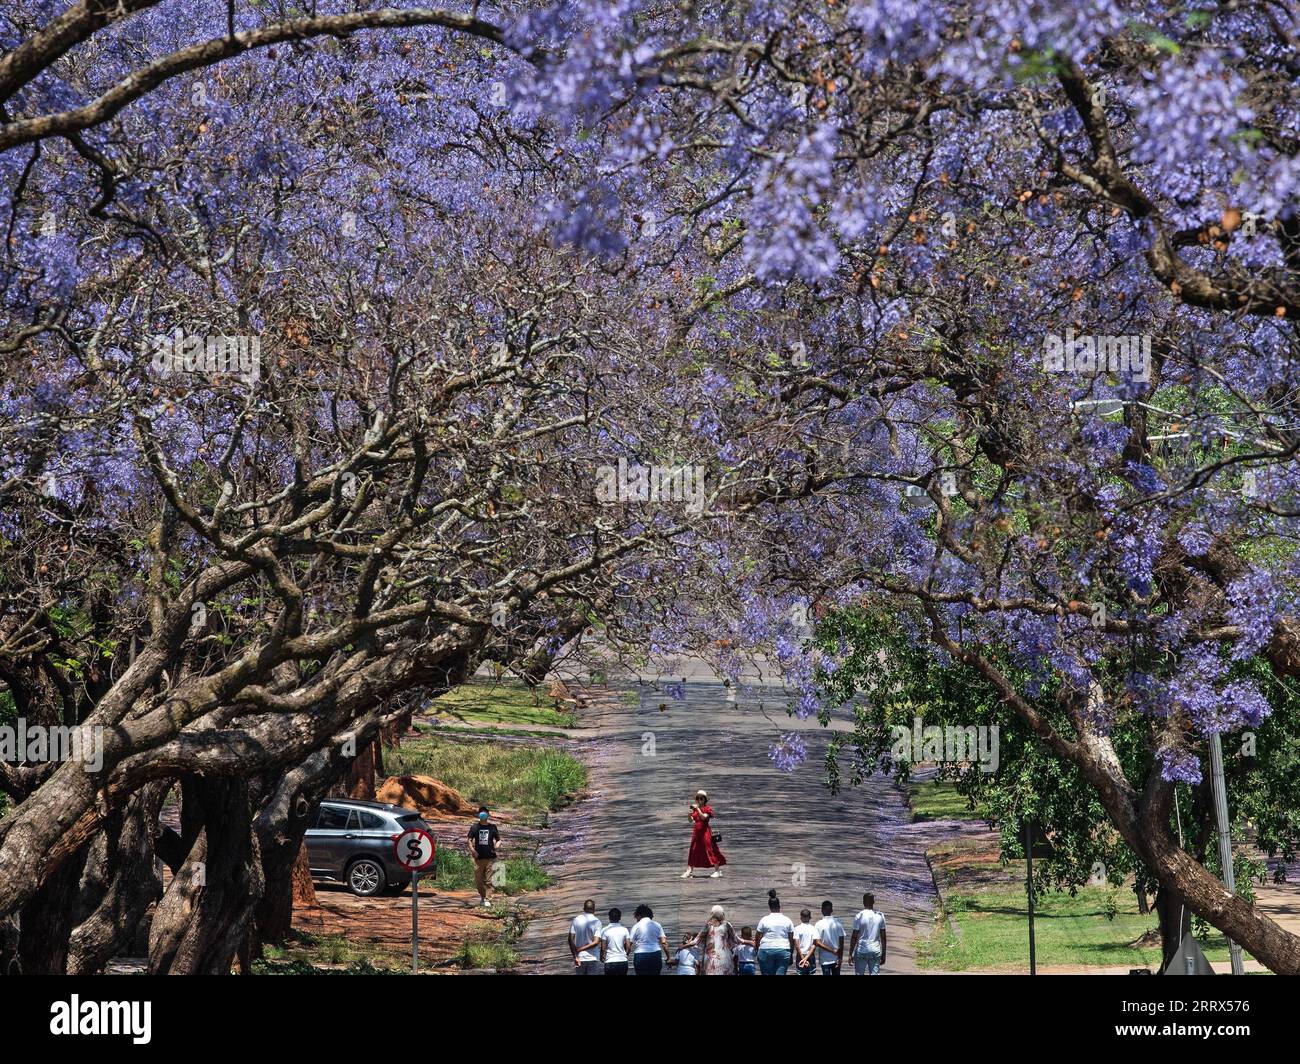 230818 -- PRETORIA, Aug. 18, 2023 -- People walk under the jacaranda trees in Pretoria, South Africa on Oct. 17, 2020. South Africa, to hold the 15th BRICS summit this month, is the southernmost country in Africa. It is the only country in the world with three capitals, with Pretoria as its administrative capital, Cape Town as its legislative capital and Bloemfontein the judicial capital. Other major cities include Johannesburg and Durban. South Africa has a pleasant climate and famous tourist destinations such as Cape of Good Hope, Kruger National Park and the Table Mountain, attracting a lar Stock Photo